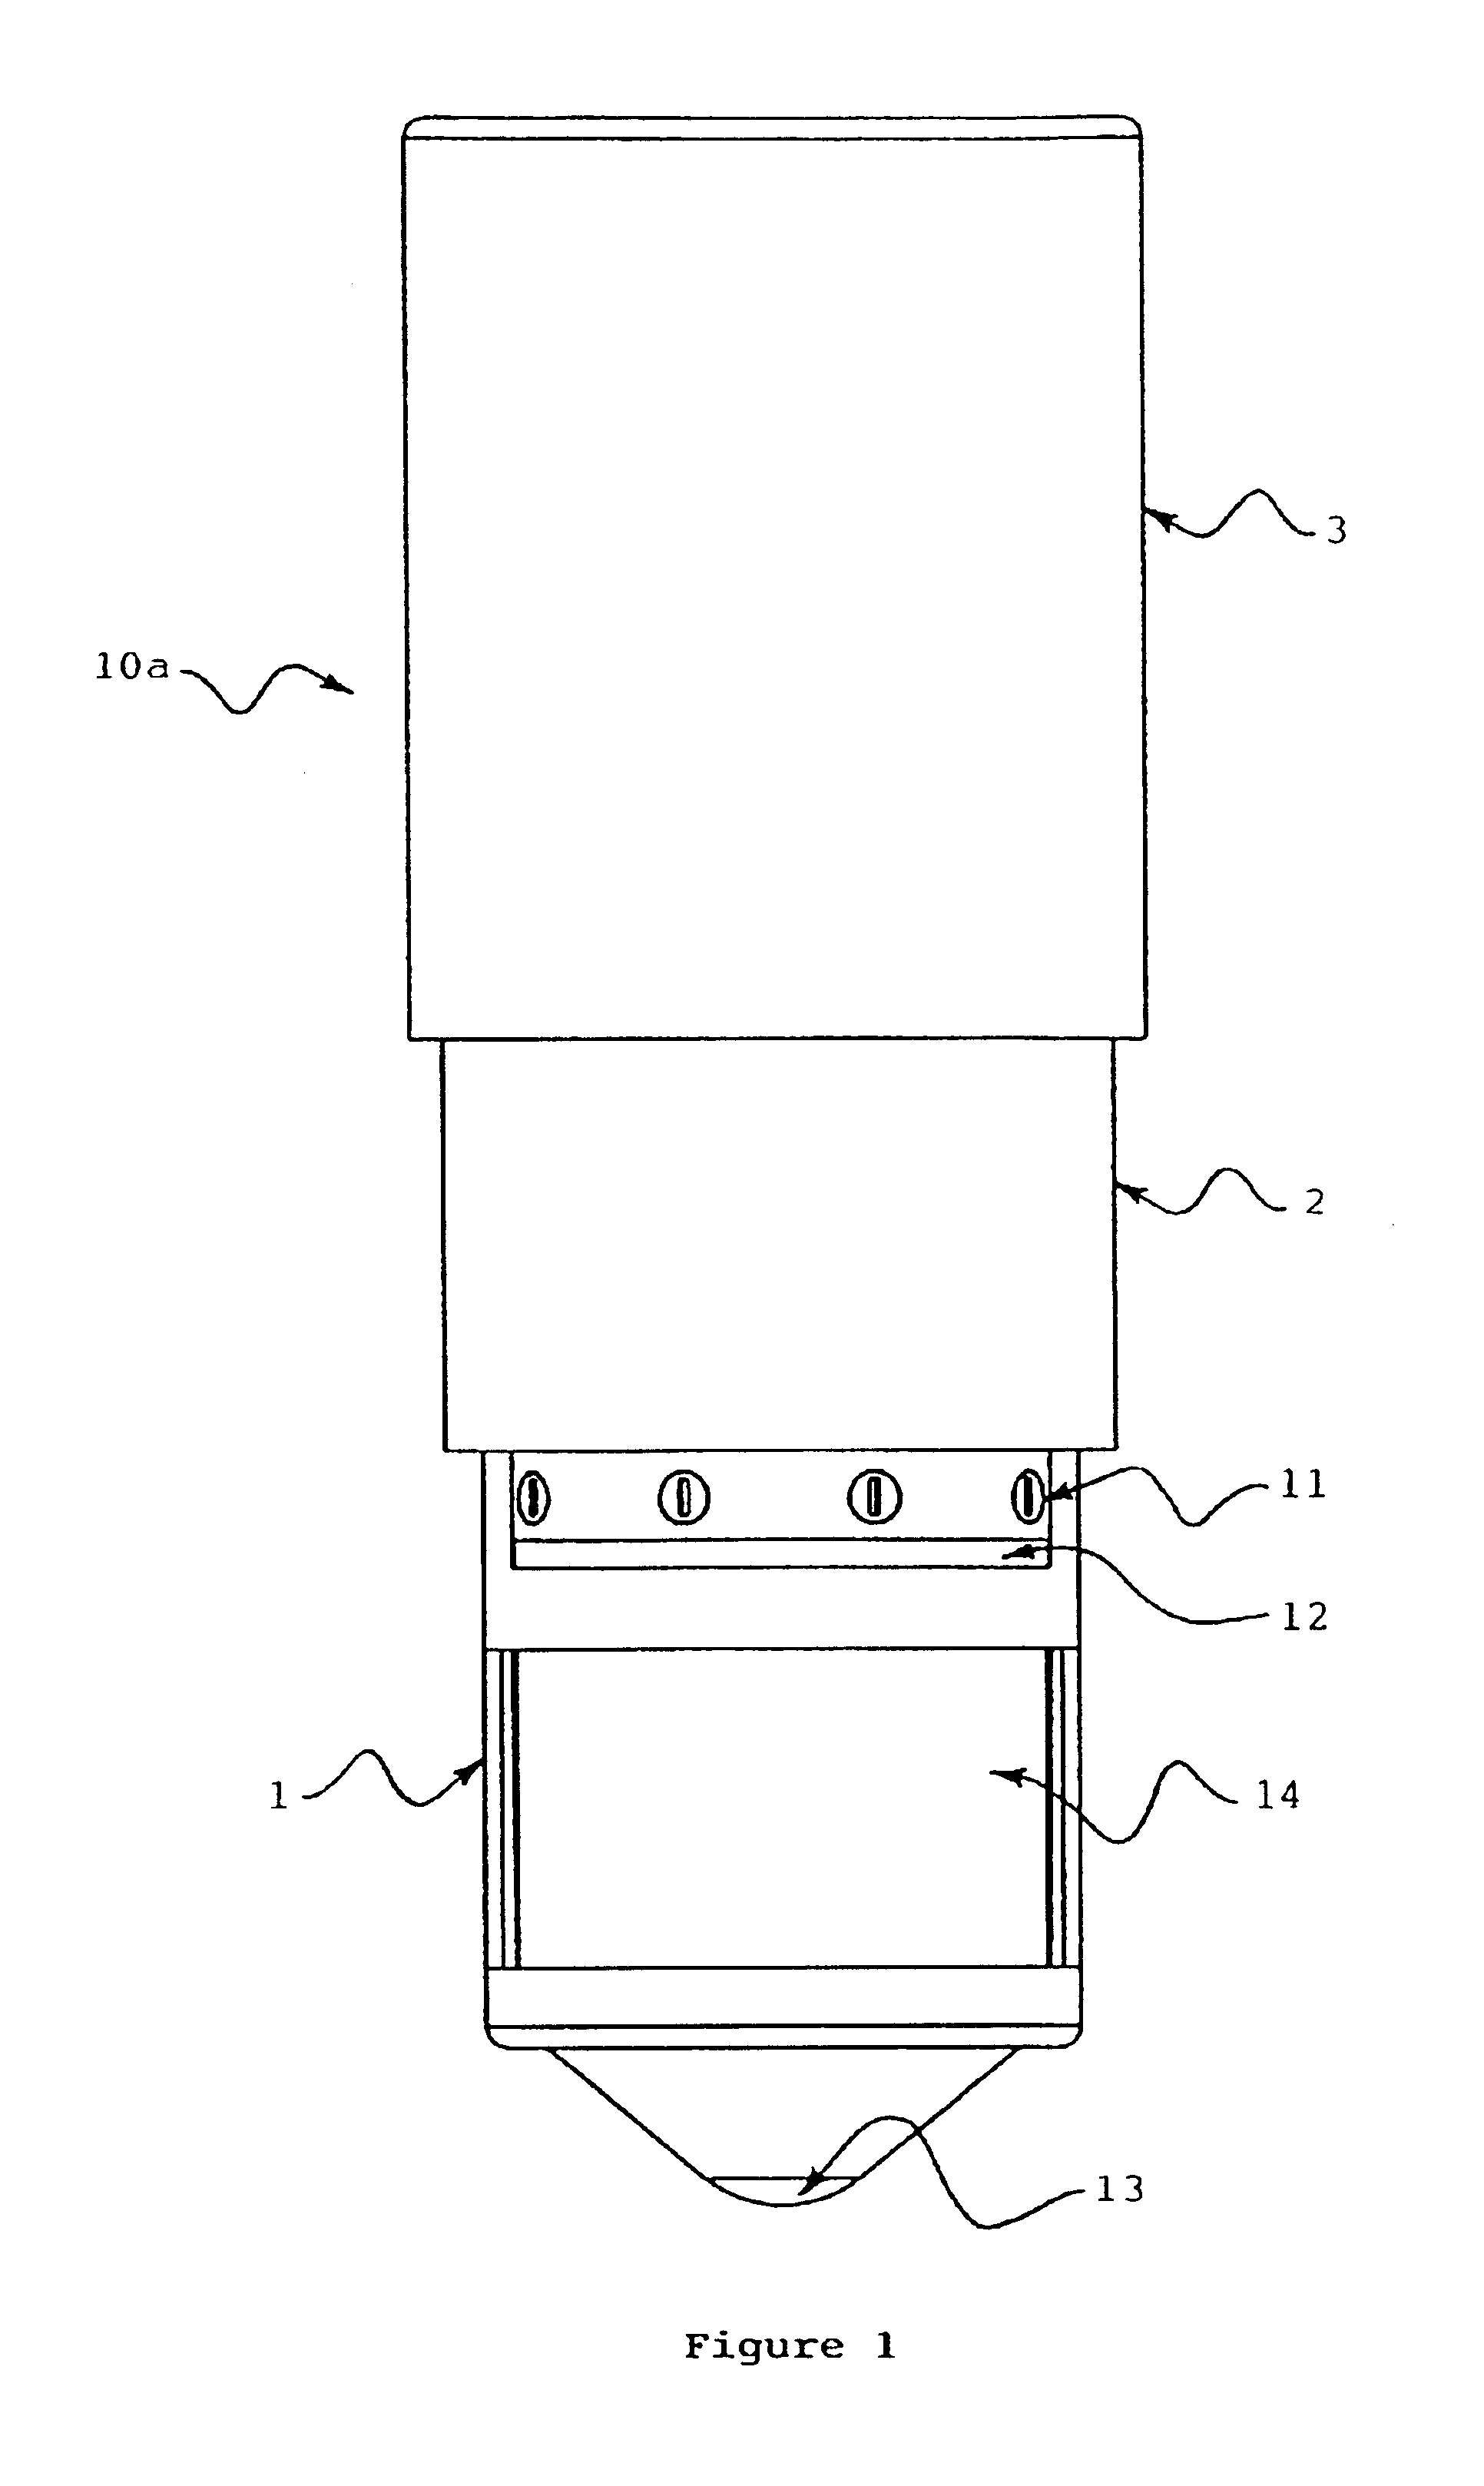 Covering and mounting structure for a motion detector having light emitting diodes and electronic adjustment controls